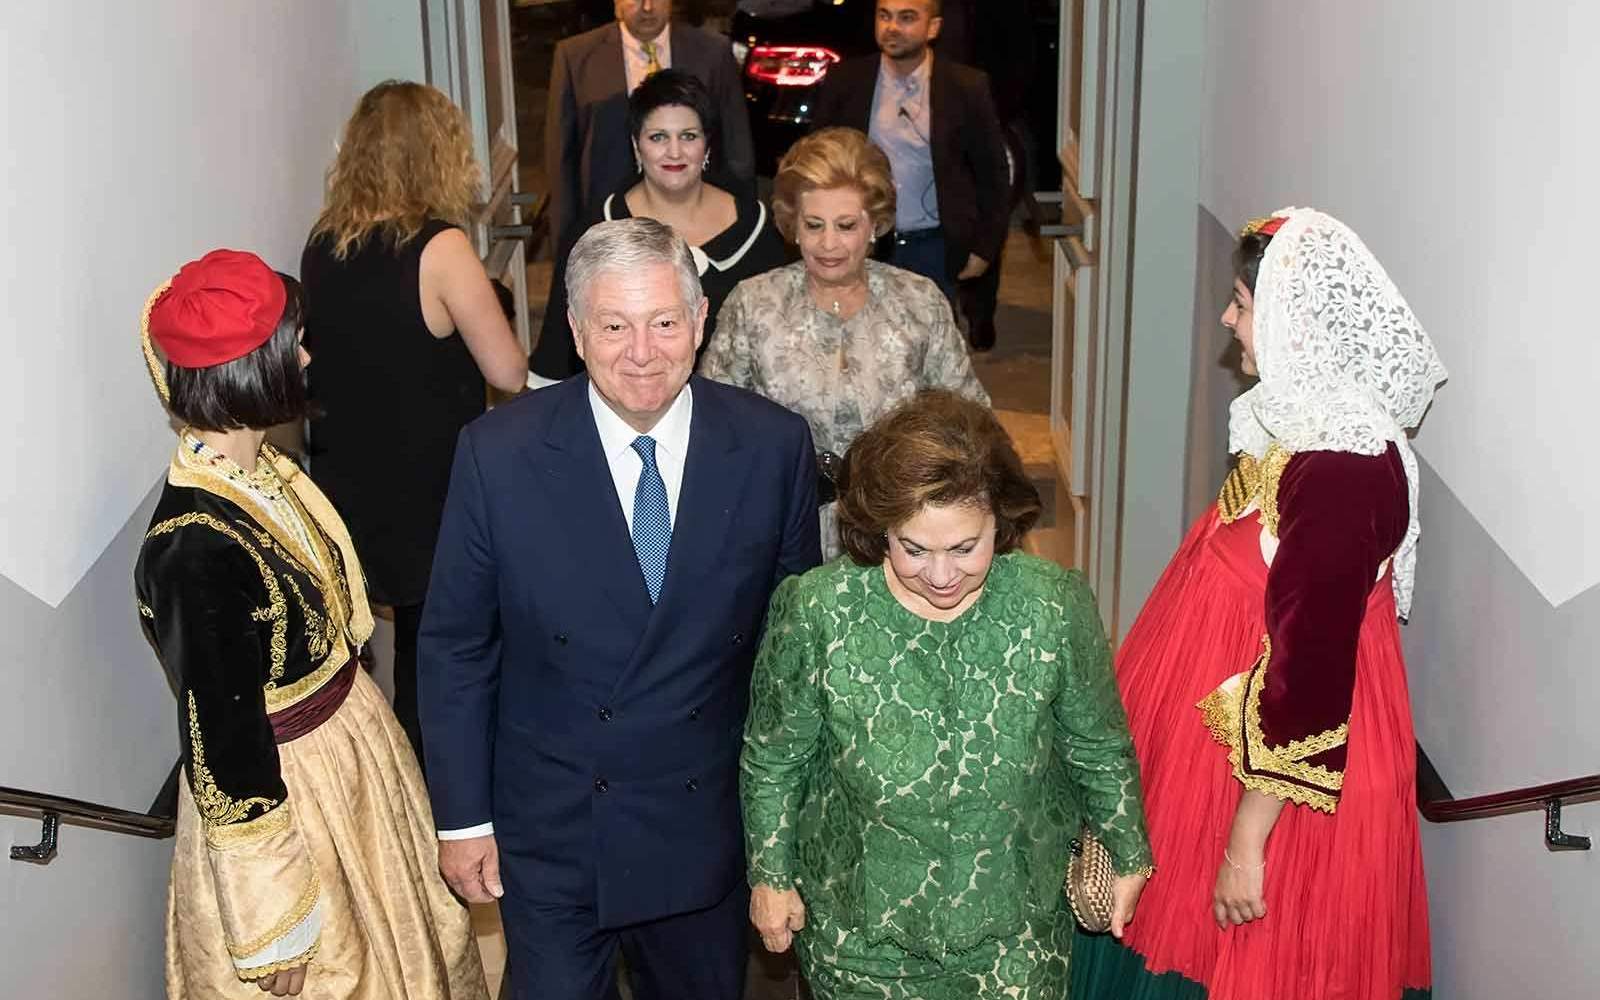 Women Union O f Patras - QUEEN Katherine of Serbia with Prince Alexander